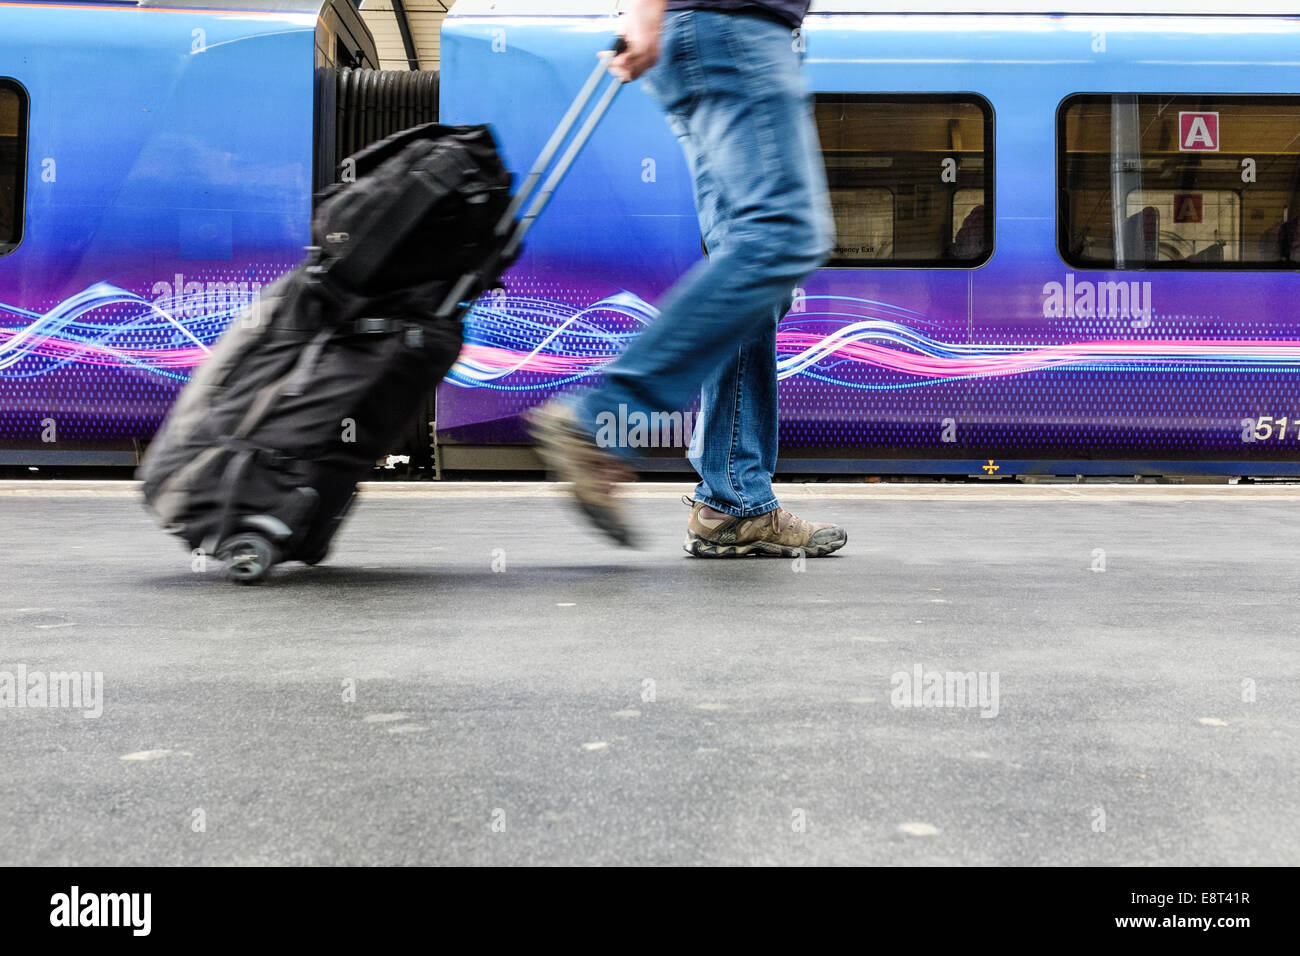 A male train passenger pulls his luggage either leaving the train or getting on it. Travel concept conceptual transport Stock Photo